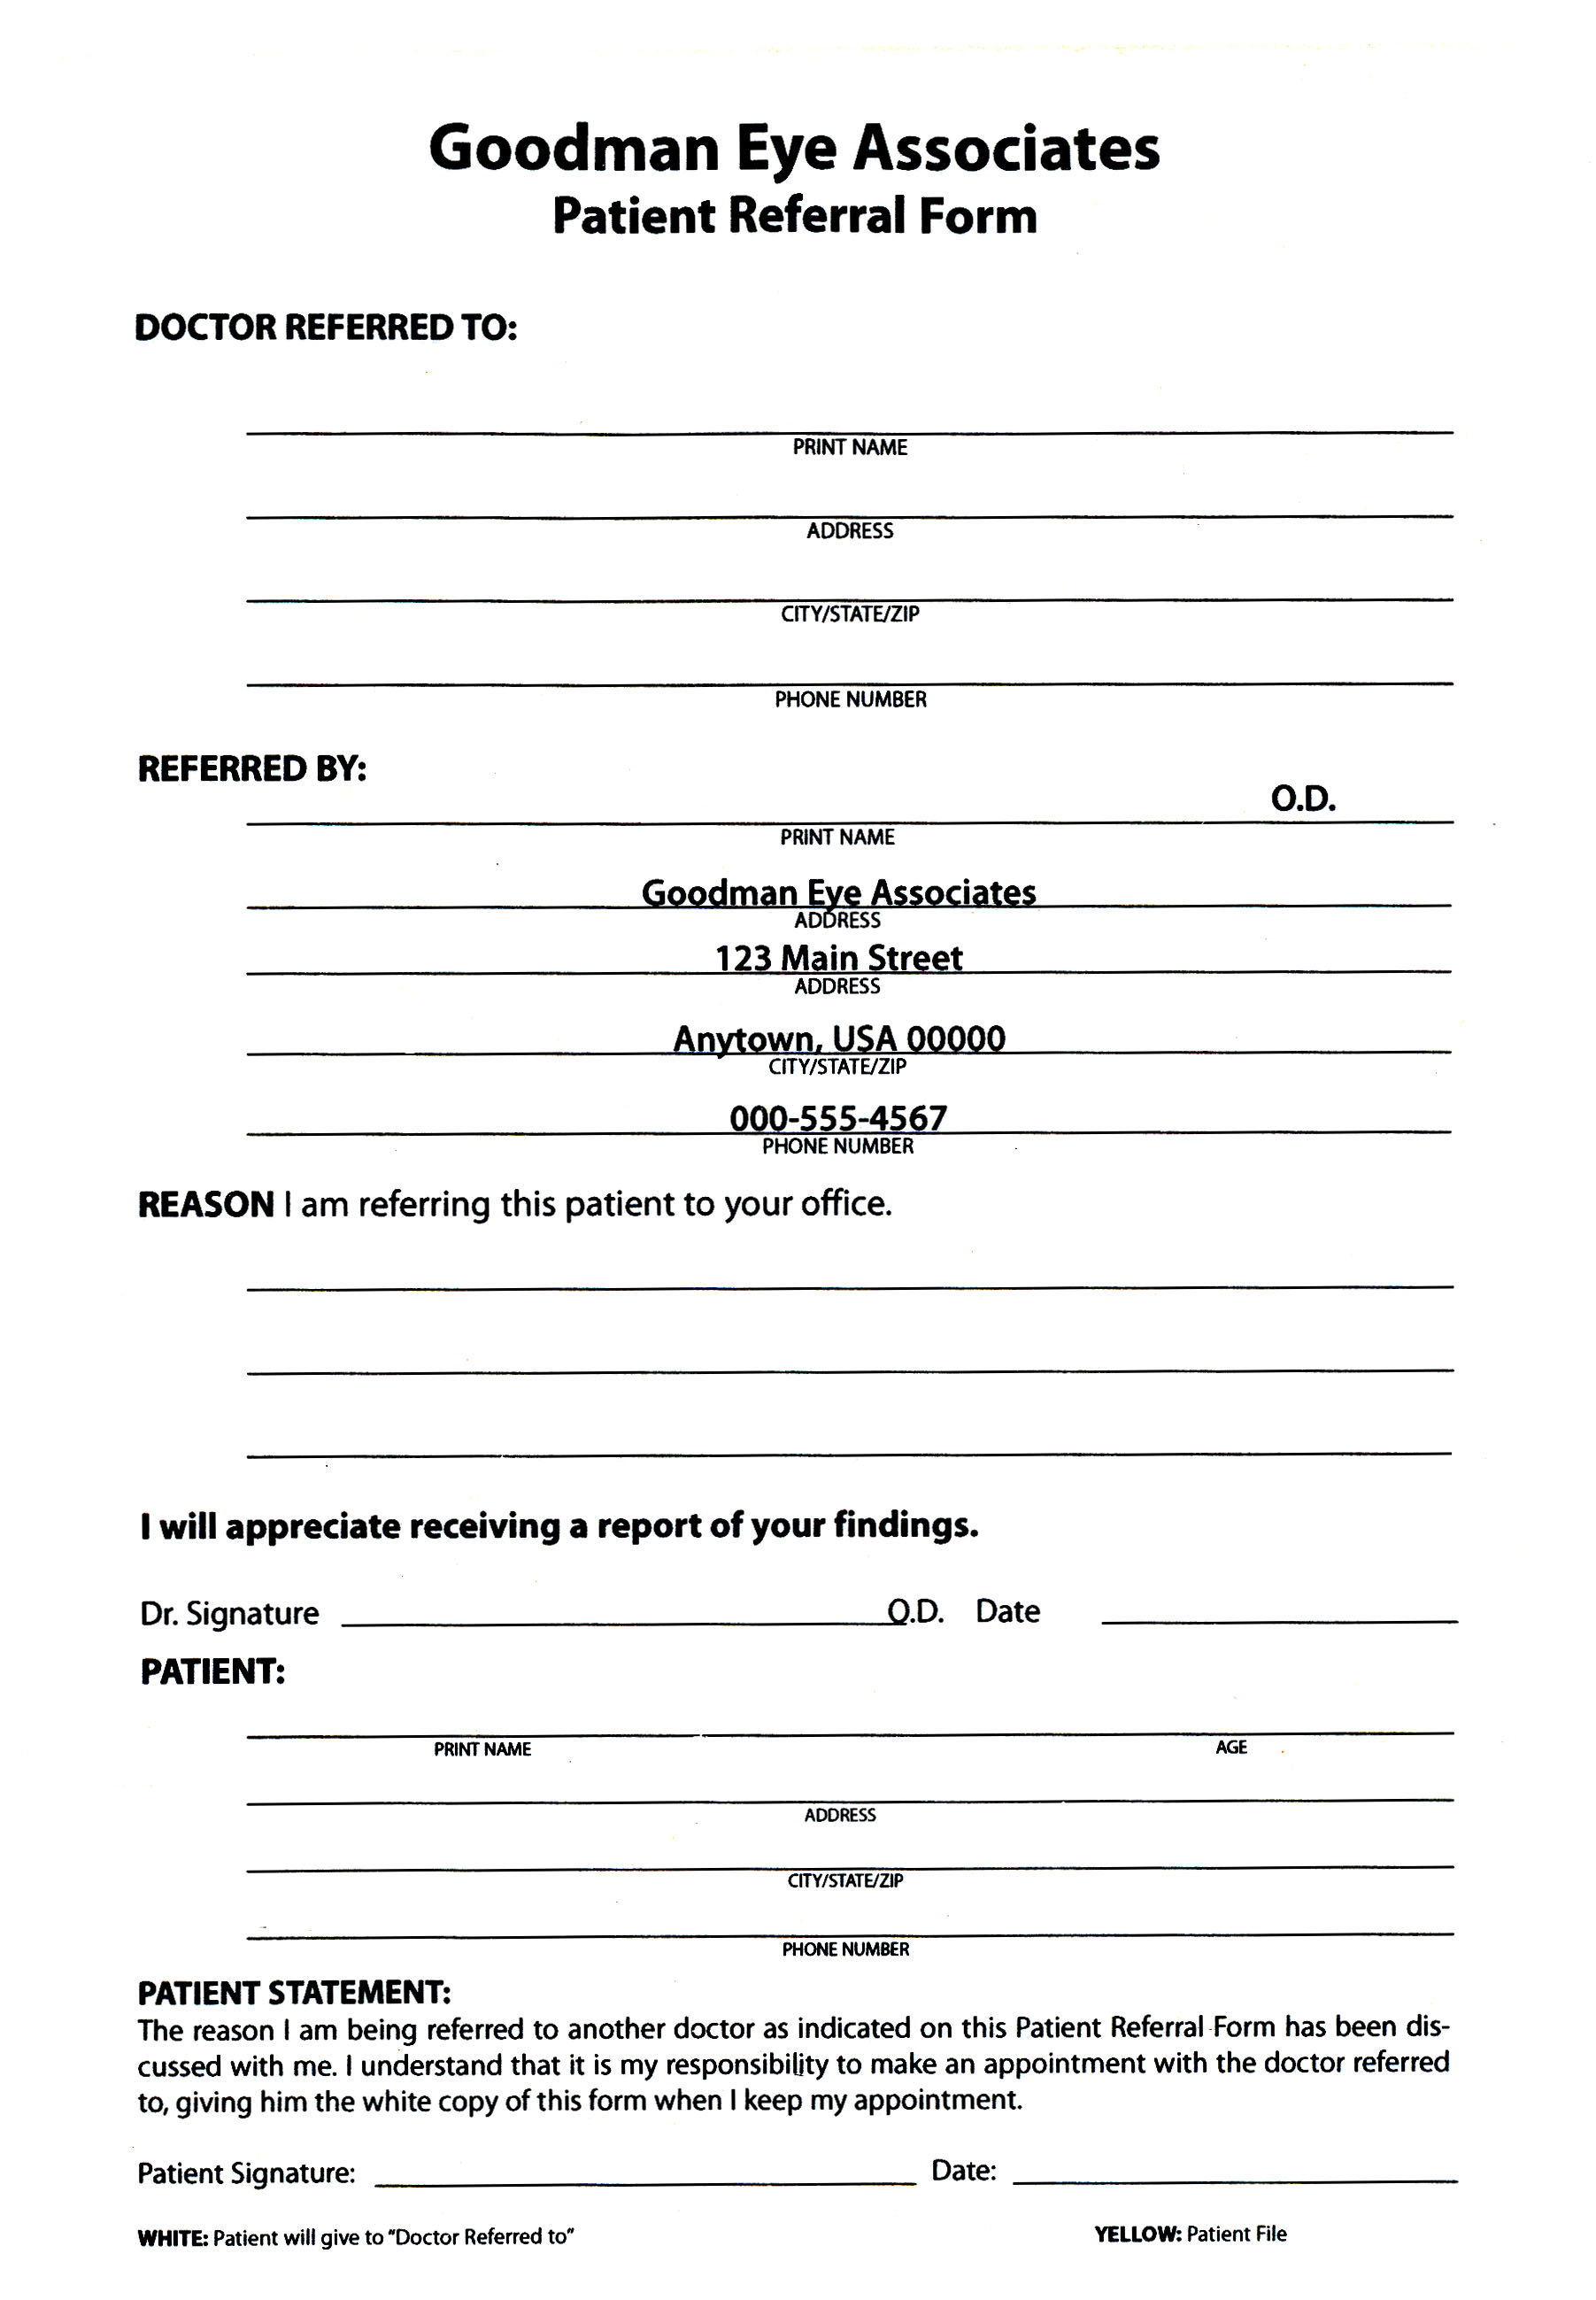 Medical Referral Form templates free printable